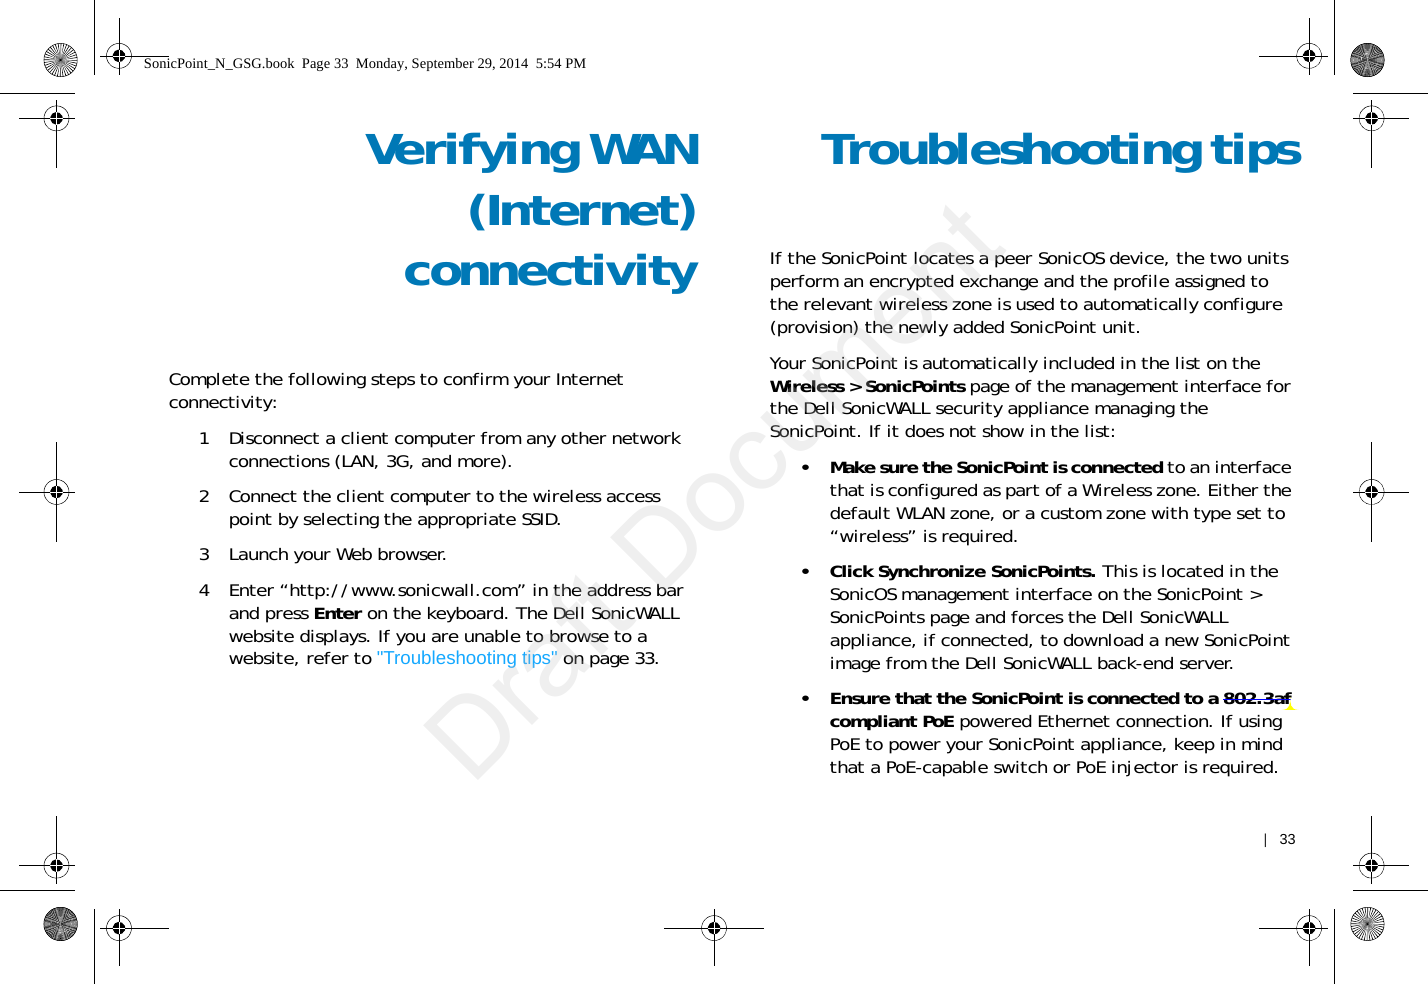    |   33Verifying WAN(Internet)connectivityComplete the following steps to confirm your Internet connectivity:1 Disconnect a client computer from any other network connections (LAN, 3G, and more). 2 Connect the client computer to the wireless access point by selecting the appropriate SSID.3 Launch your Web browser.4 Enter “http://www.sonicwall.com” in the address bar and press Enter on the keyboard. The Dell SonicWALL website displays. If you are unable to browse to a website, refer to &quot;Troubleshooting tips&quot; on page 33. Troubleshooting tipsIf the SonicPoint locates a peer SonicOS device, the two units perform an encrypted exchange and the profile assigned to the relevant wireless zone is used to automatically configure (provision) the newly added SonicPoint unit. Your SonicPoint is automatically included in the list on the Wireless &gt; SonicPoints page of the management interface for the Dell SonicWALL security appliance managing the SonicPoint. If it does not show in the list: • Make sure the SonicPoint is connected to an interface that is configured as part of a Wireless zone. Either the default WLAN zone, or a custom zone with type set to “wireless” is required.• Click Synchronize SonicPoints. This is located in the SonicOS management interface on the SonicPoint &gt; SonicPoints page and forces the Dell SonicWALL appliance, if connected, to download a new SonicPoint image from the Dell SonicWALL back-end server.• Ensure that the SonicPoint is connected to a 802.3af compliant PoE powered Ethernet connection. If using PoE to power your SonicPoint appliance, keep in mind that a PoE-capable switch or PoE injector is required.SonicPoint_N_GSG.book  Page 33  Monday, September 29, 2014  5:54 PMDraft Document